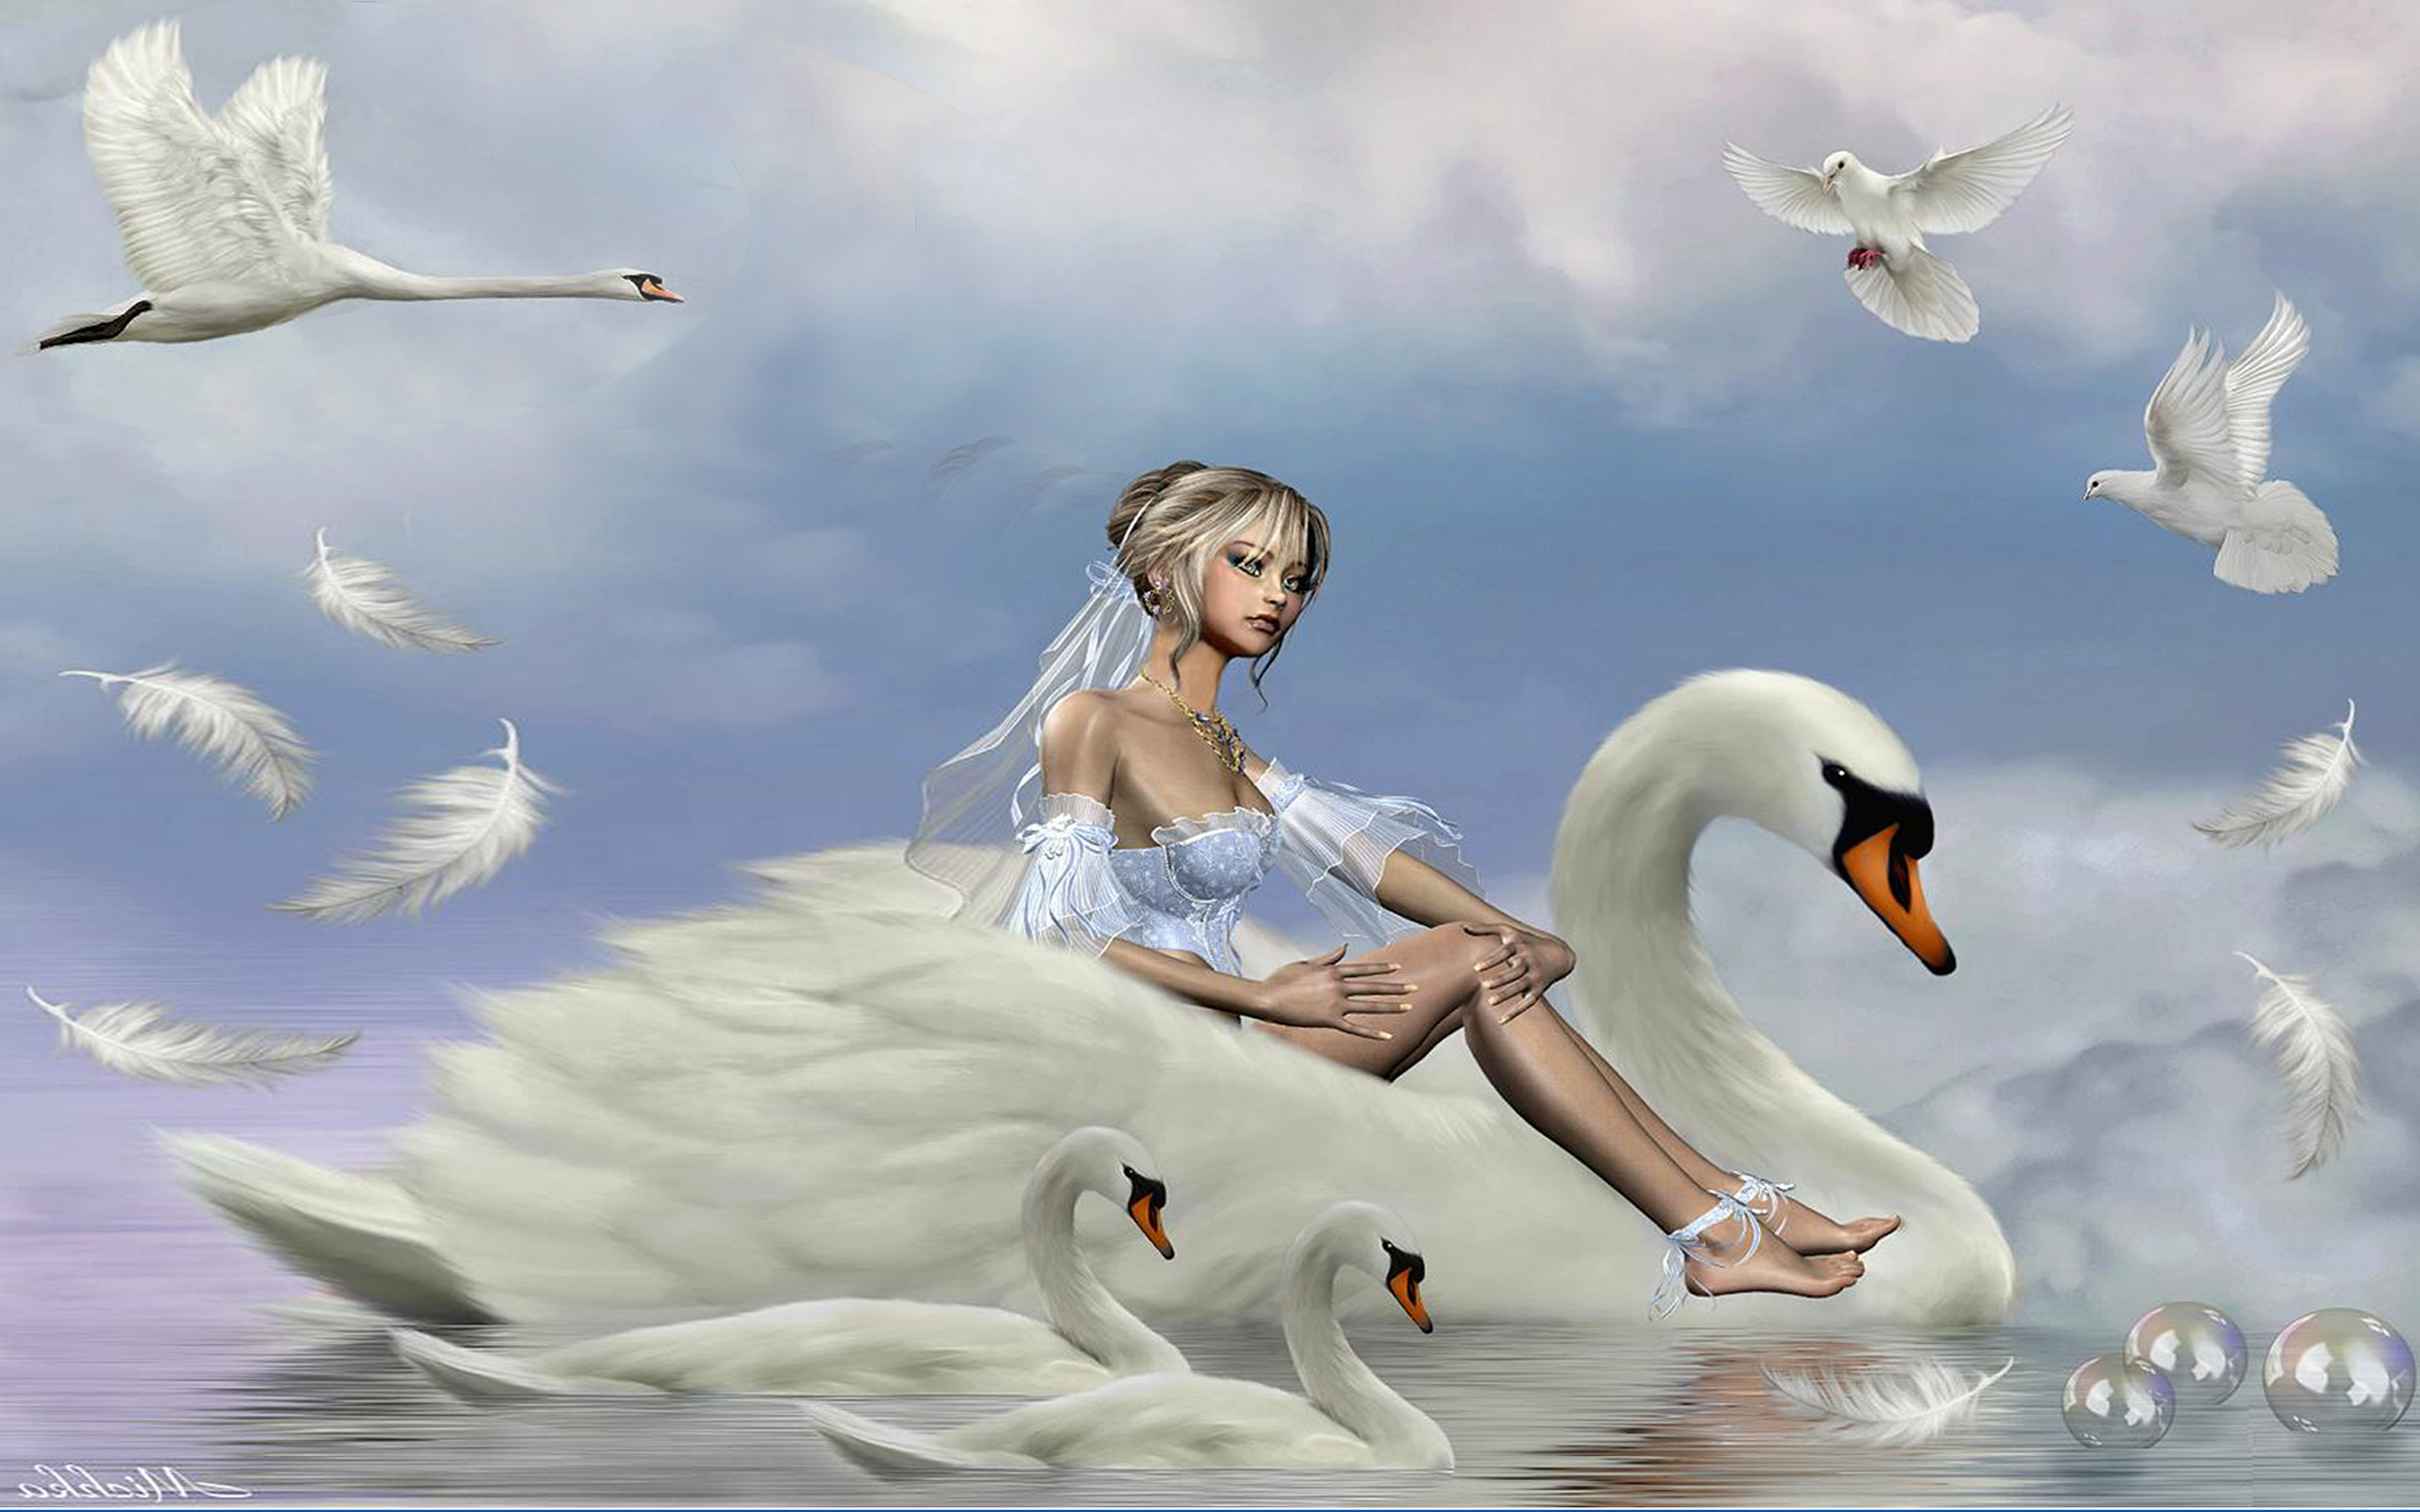 Girl Riding A Swan Lake Accompanied By Swans And Pigeons Feathers